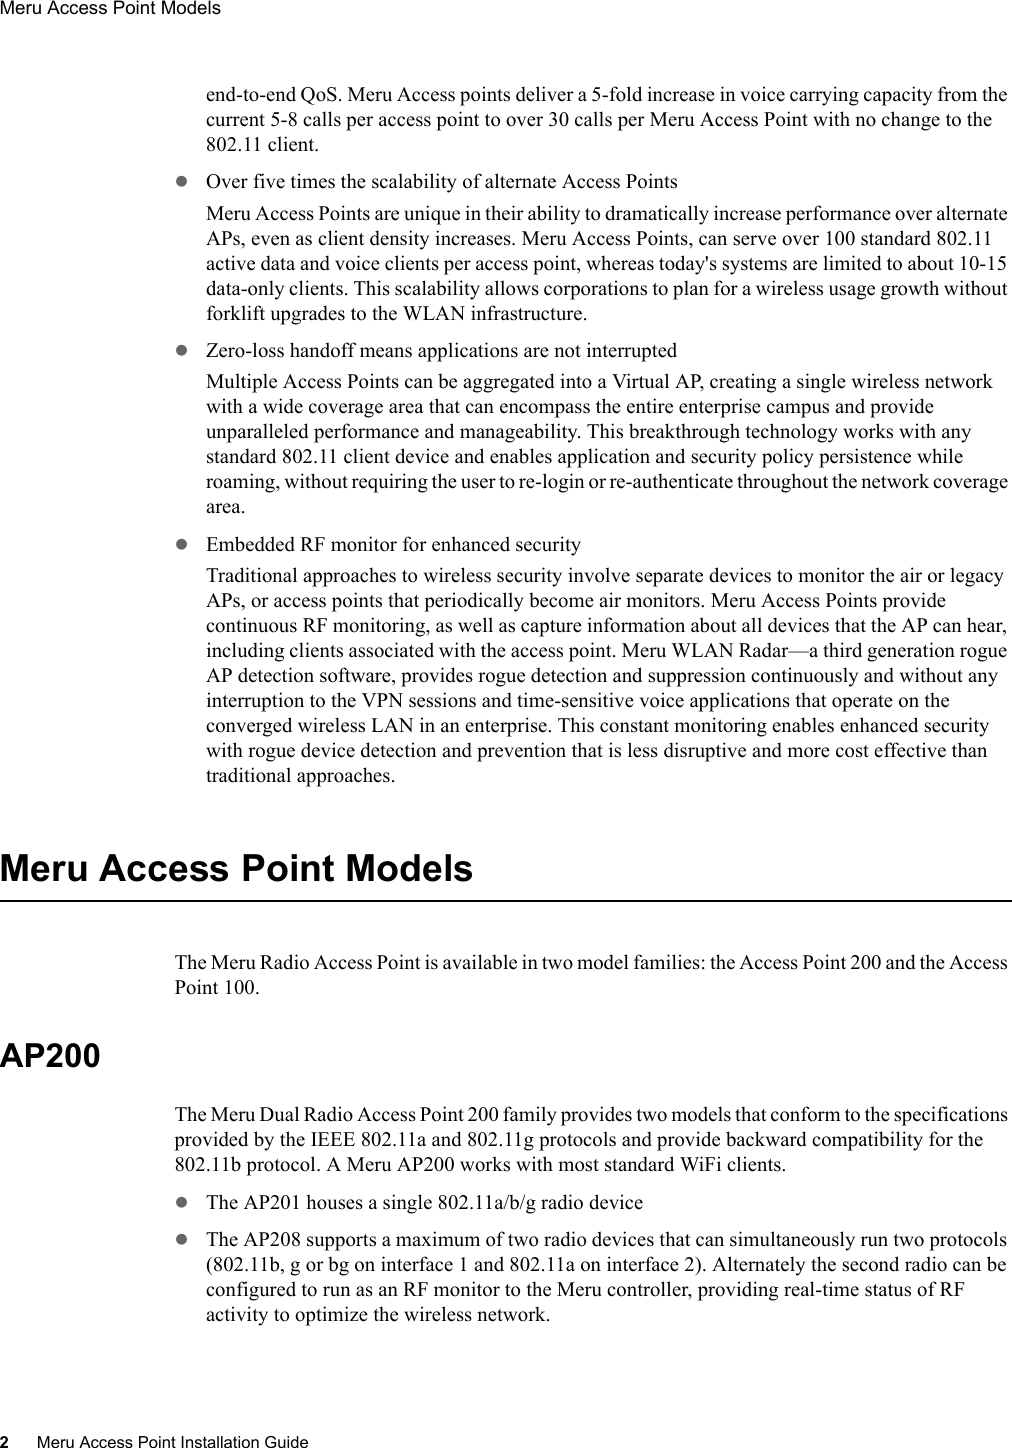 2Meru Access Point Installation GuideMeru Access Point Models end-to-end QoS. Meru Access points deliver a 5-fold increase in voice carrying capacity from the current 5-8 calls per access point to over 30 calls per Meru Access Point with no change to the 802.11 client.zOver five times the scalability of alternate Access PointsMeru Access Points are unique in their ability to dramatically increase performance over alternate APs, even as client density increases. Meru Access Points, can serve over 100 standard 802.11 active data and voice clients per access point, whereas today&apos;s systems are limited to about 10-15 data-only clients. This scalability allows corporations to plan for a wireless usage growth without forklift upgrades to the WLAN infrastructure.zZero-loss handoff means applications are not interruptedMultiple Access Points can be aggregated into a Virtual AP, creating a single wireless network with a wide coverage area that can encompass the entire enterprise campus and provide unparalleled performance and manageability. This breakthrough technology works with any standard 802.11 client device and enables application and security policy persistence while roaming, without requiring the user to re-login or re-authenticate throughout the network coverage area.zEmbedded RF monitor for enhanced securityTraditional approaches to wireless security involve separate devices to monitor the air or legacy APs, or access points that periodically become air monitors. Meru Access Points provide continuous RF monitoring, as well as capture information about all devices that the AP can hear, including clients associated with the access point. Meru WLAN Radar—a third generation rogue AP detection software, provides rogue detection and suppression continuously and without any interruption to the VPN sessions and time-sensitive voice applications that operate on the converged wireless LAN in an enterprise. This constant monitoring enables enhanced security with rogue device detection and prevention that is less disruptive and more cost effective than traditional approaches. Meru Access Point ModelsThe Meru Radio Access Point is available in two model families: the Access Point 200 and the Access Point 100.AP200The Meru Dual Radio Access Point 200 family provides two models that conform to the specifications provided by the IEEE 802.11a and 802.11g protocols and provide backward compatibility for the 802.11b protocol. A Meru AP200 works with most standard WiFi clients.zThe AP201 houses a single 802.11a/b/g radio devicezThe AP208 supports a maximum of two radio devices that can simultaneously run two protocols (802.11b, g or bg on interface 1 and 802.11a on interface 2). Alternately the second radio can be configured to run as an RF monitor to the Meru controller, providing real-time status of RF activity to optimize the wireless network.